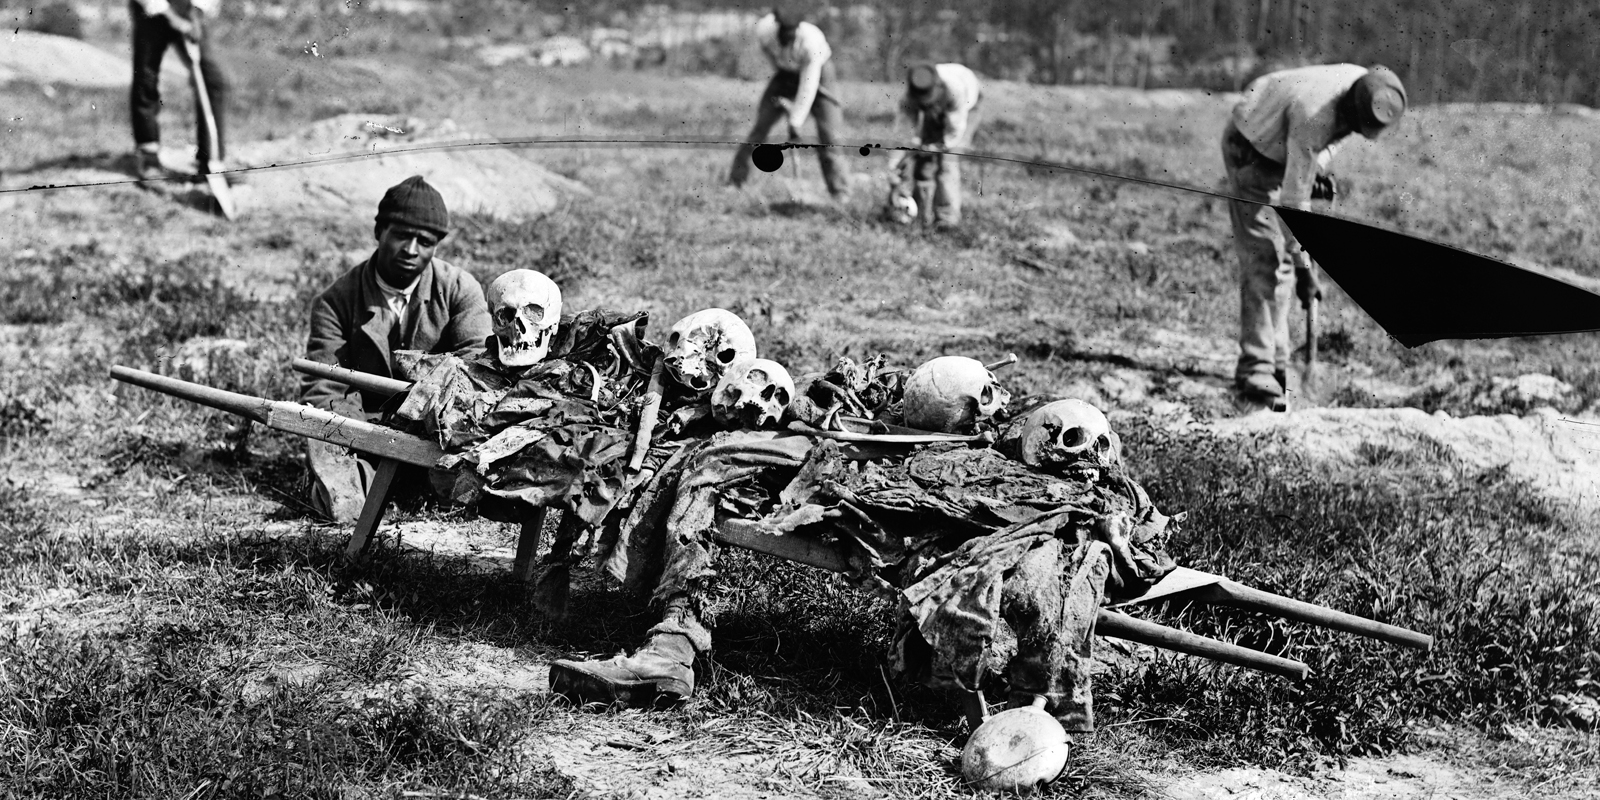 This photograph shows a Black man squatting near a collection of bones and other remains of the war dead.